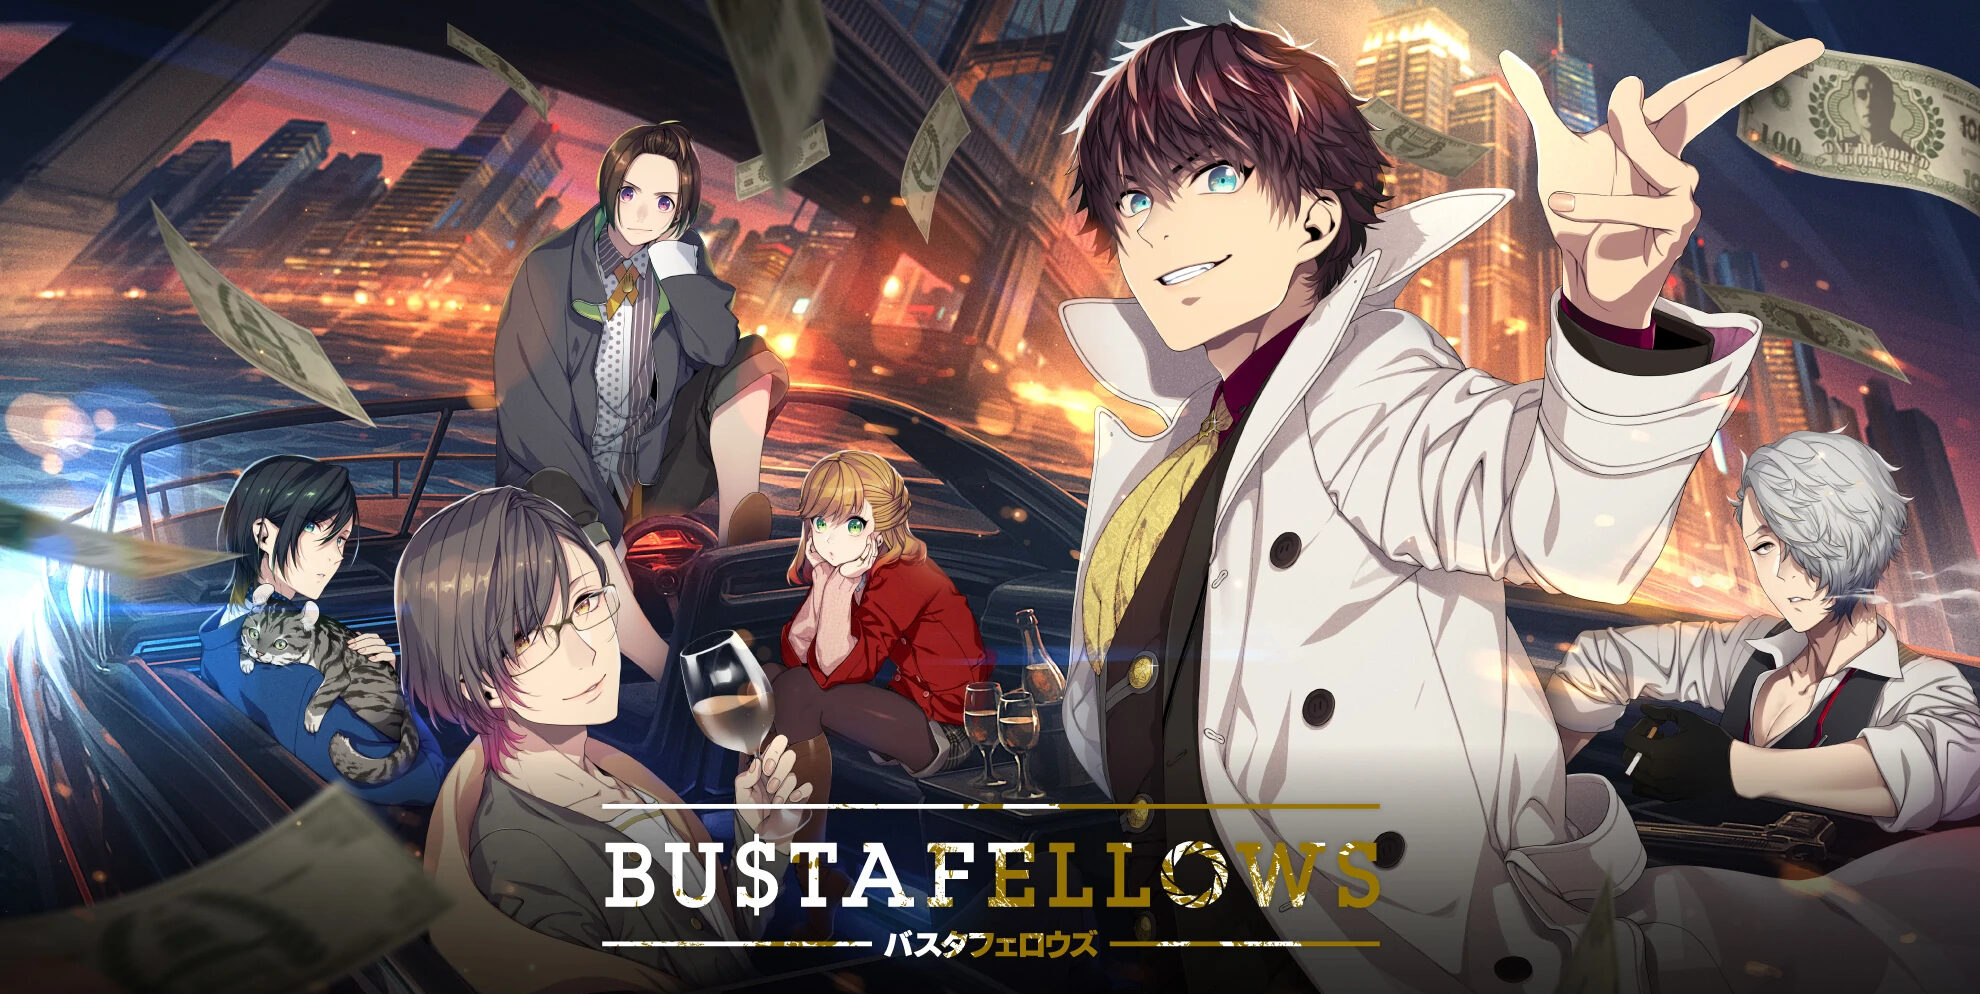 An official art spread for BUSTAFELLOWS. A group of people looking towards the viewer sit in various poses on a speeding boat. A scene of a city illuminated in the night is in the backdrop.